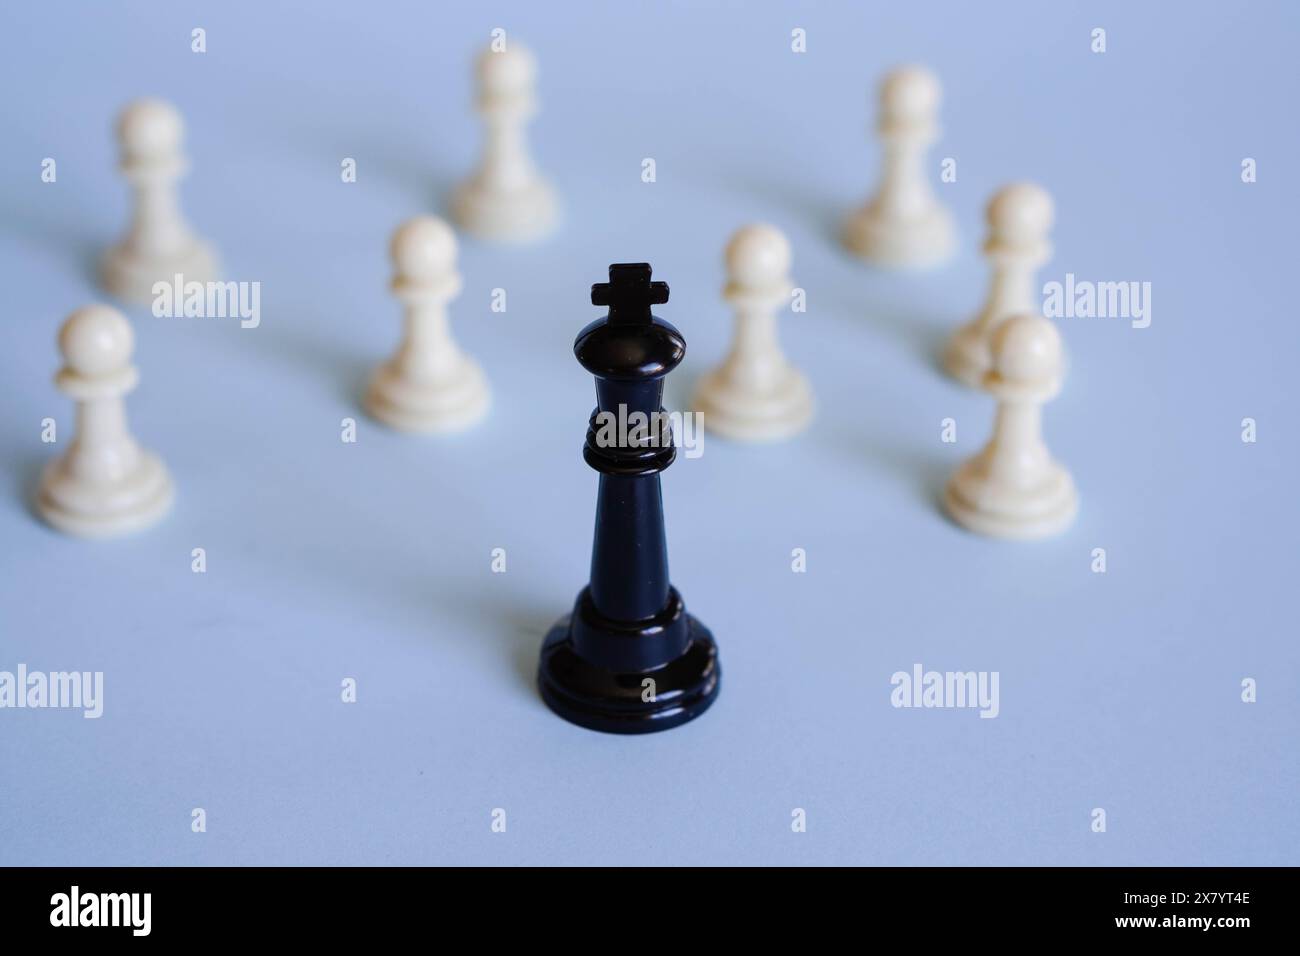 chess king in front of several pawns, representing the role of leadership and guidance. Stock Photo